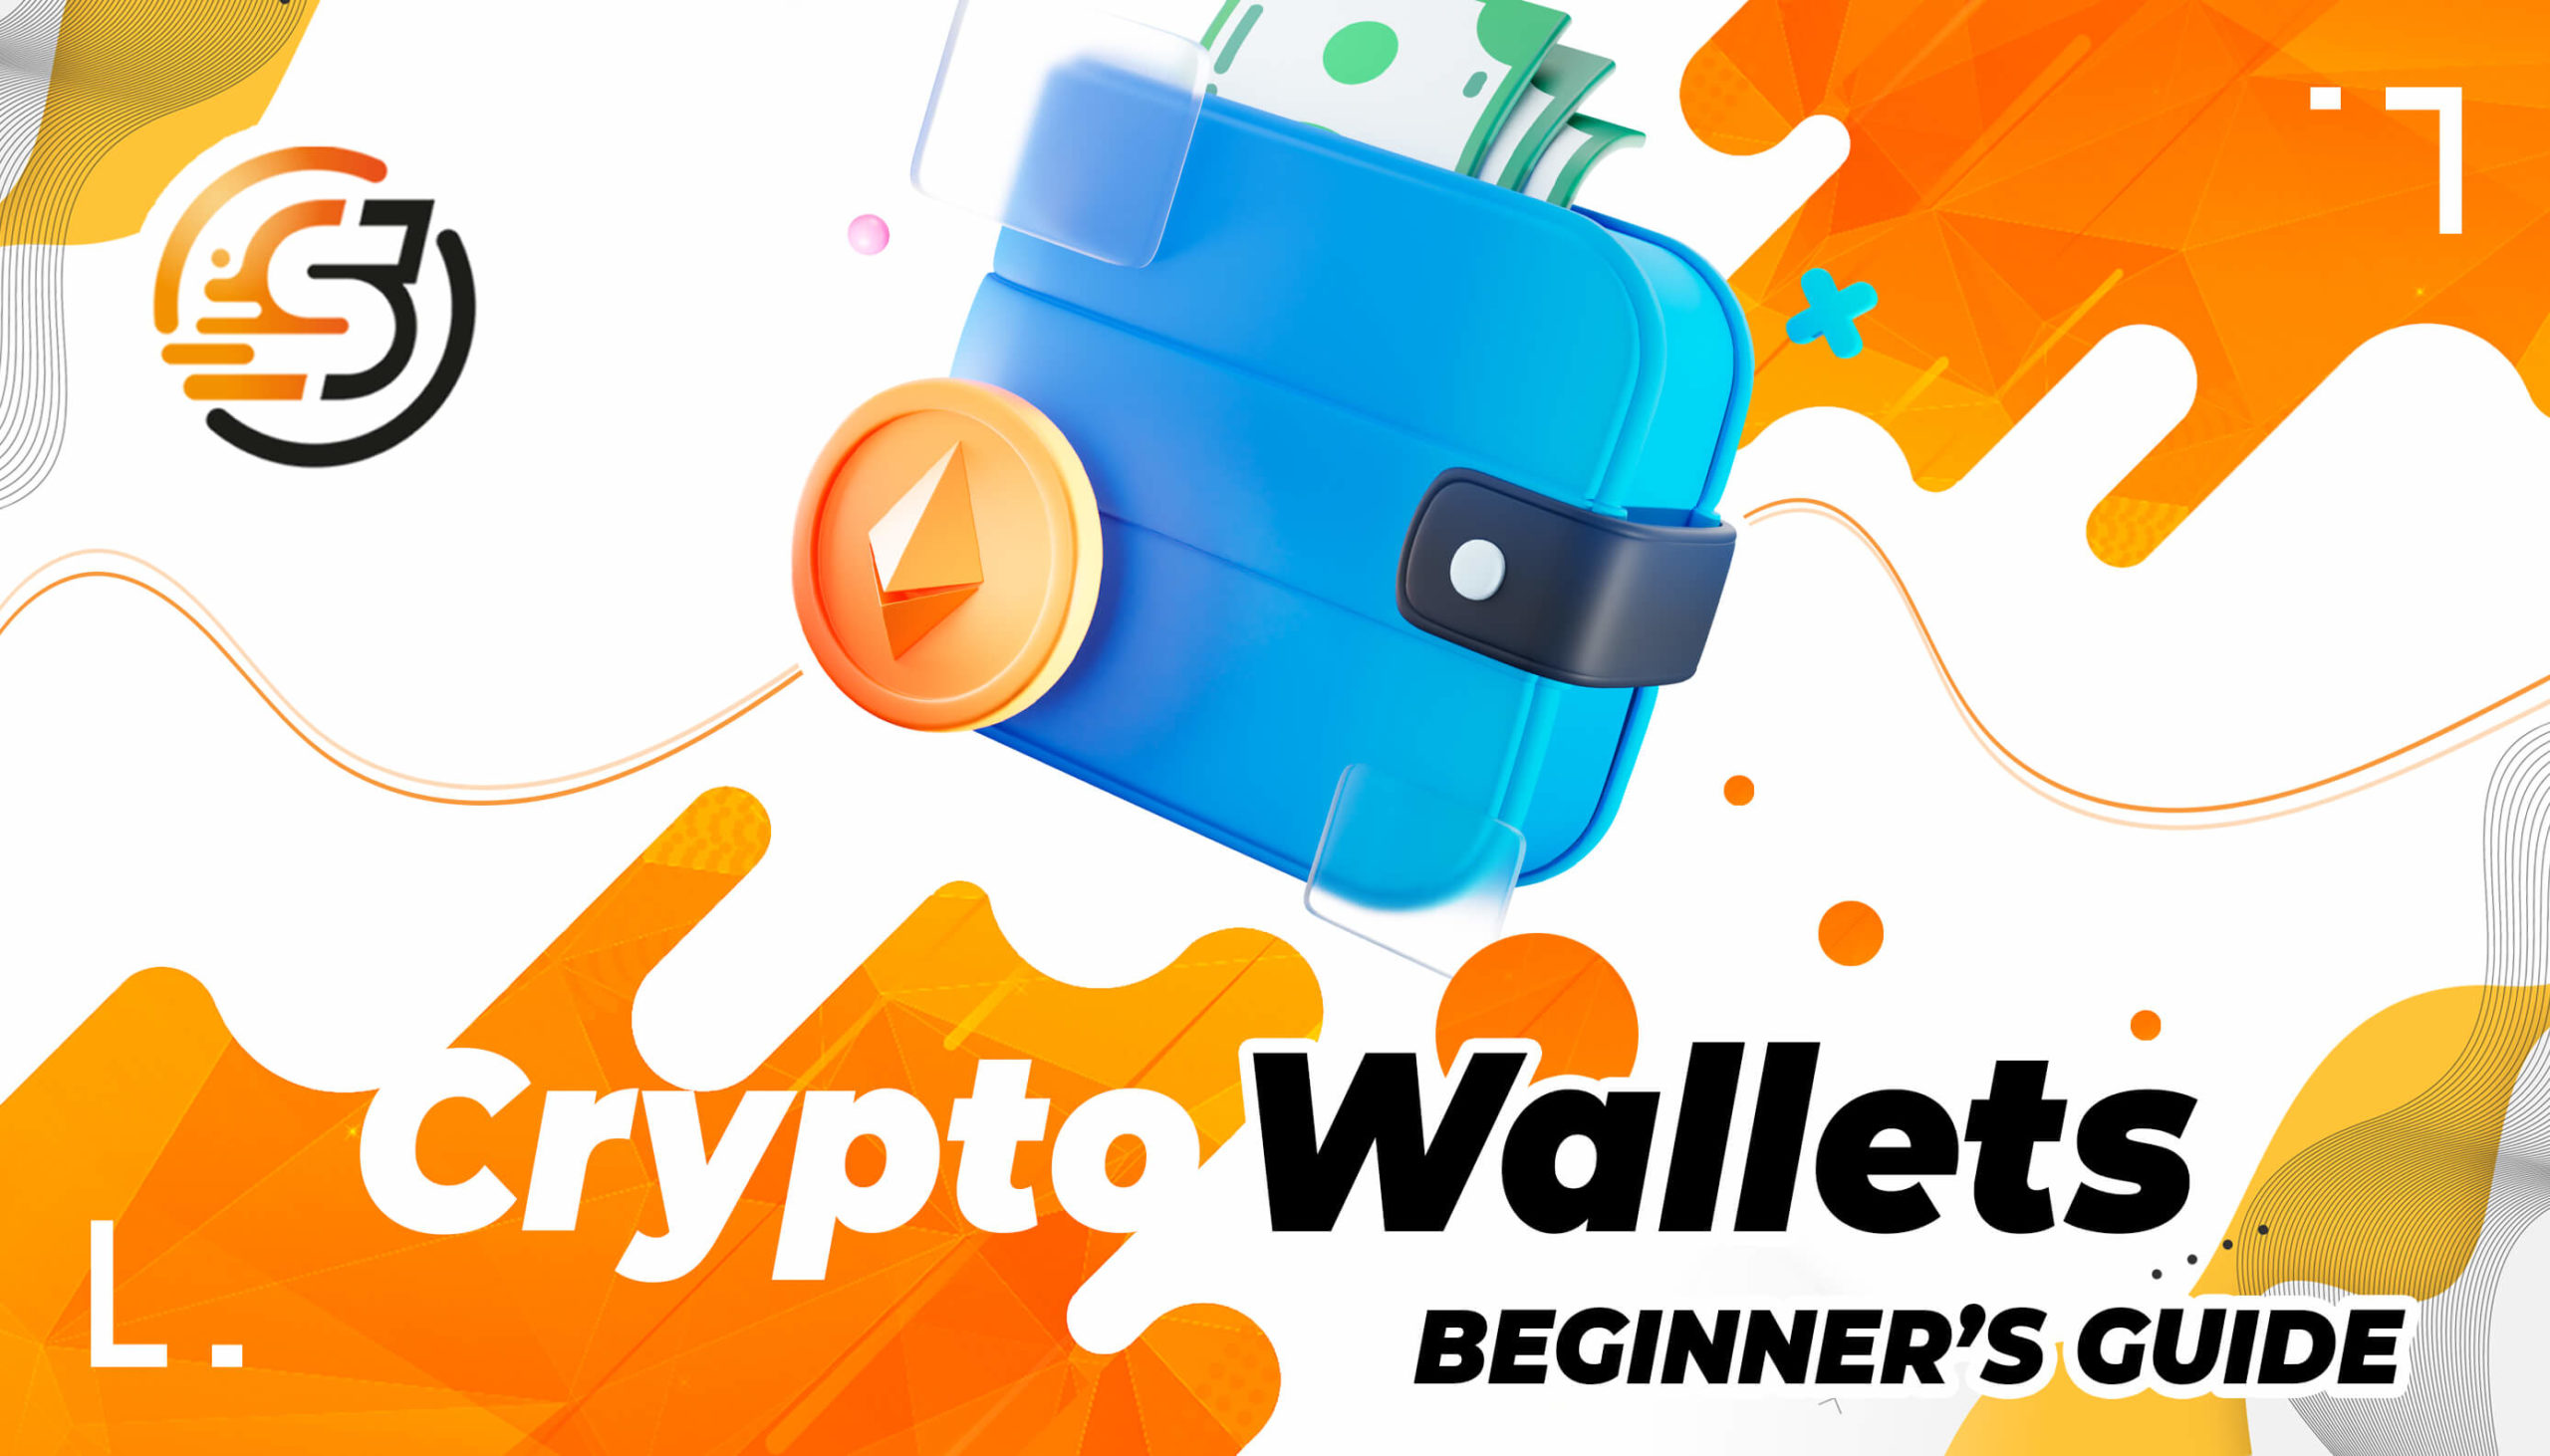 Crypto Wallets guide